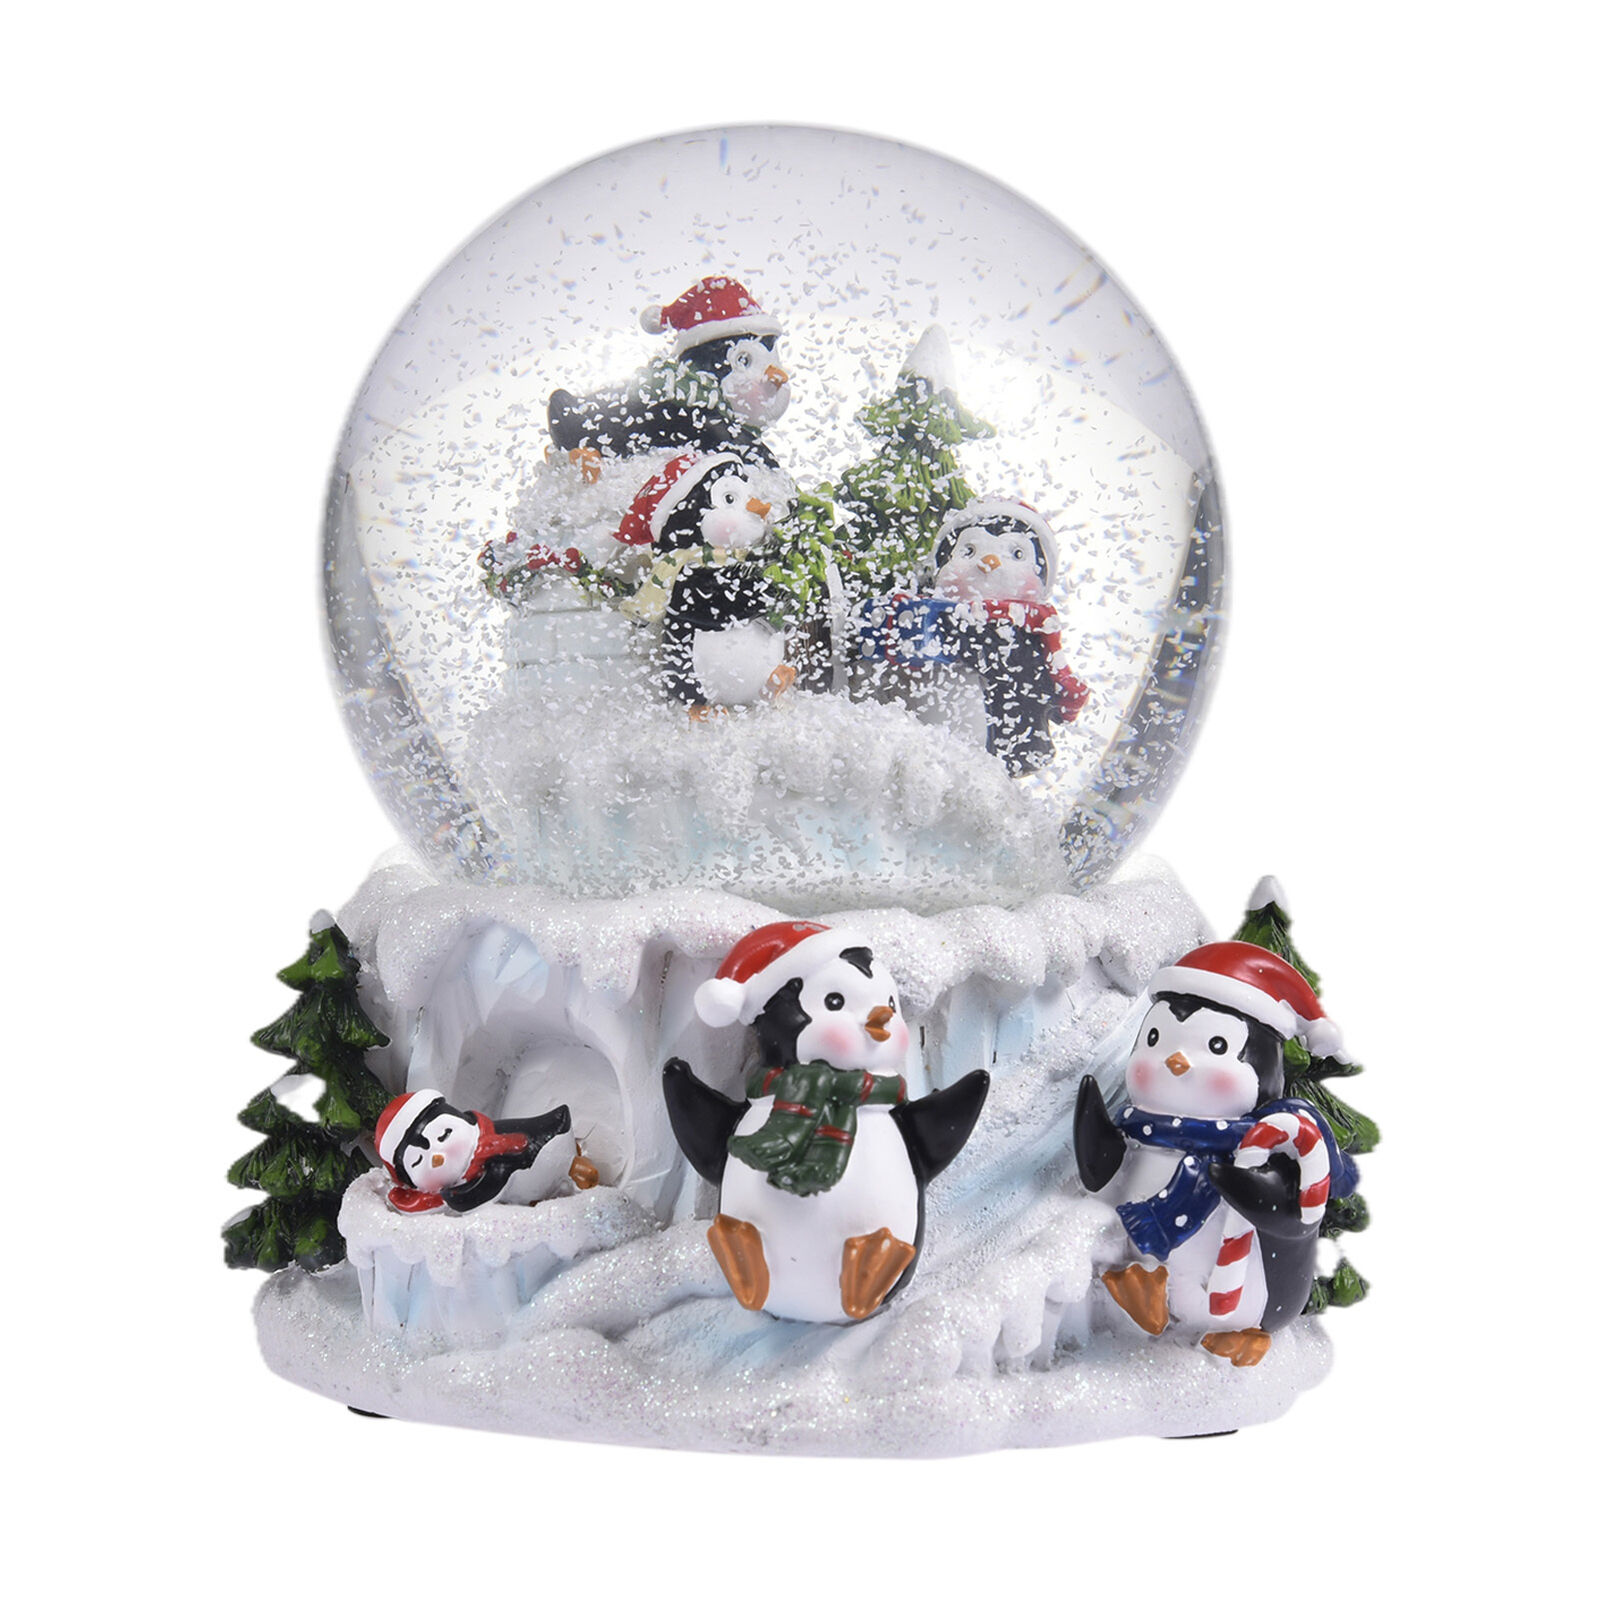 Penguin Musical Snow Globe Personalized Snow Globe For Home Christmas Kind